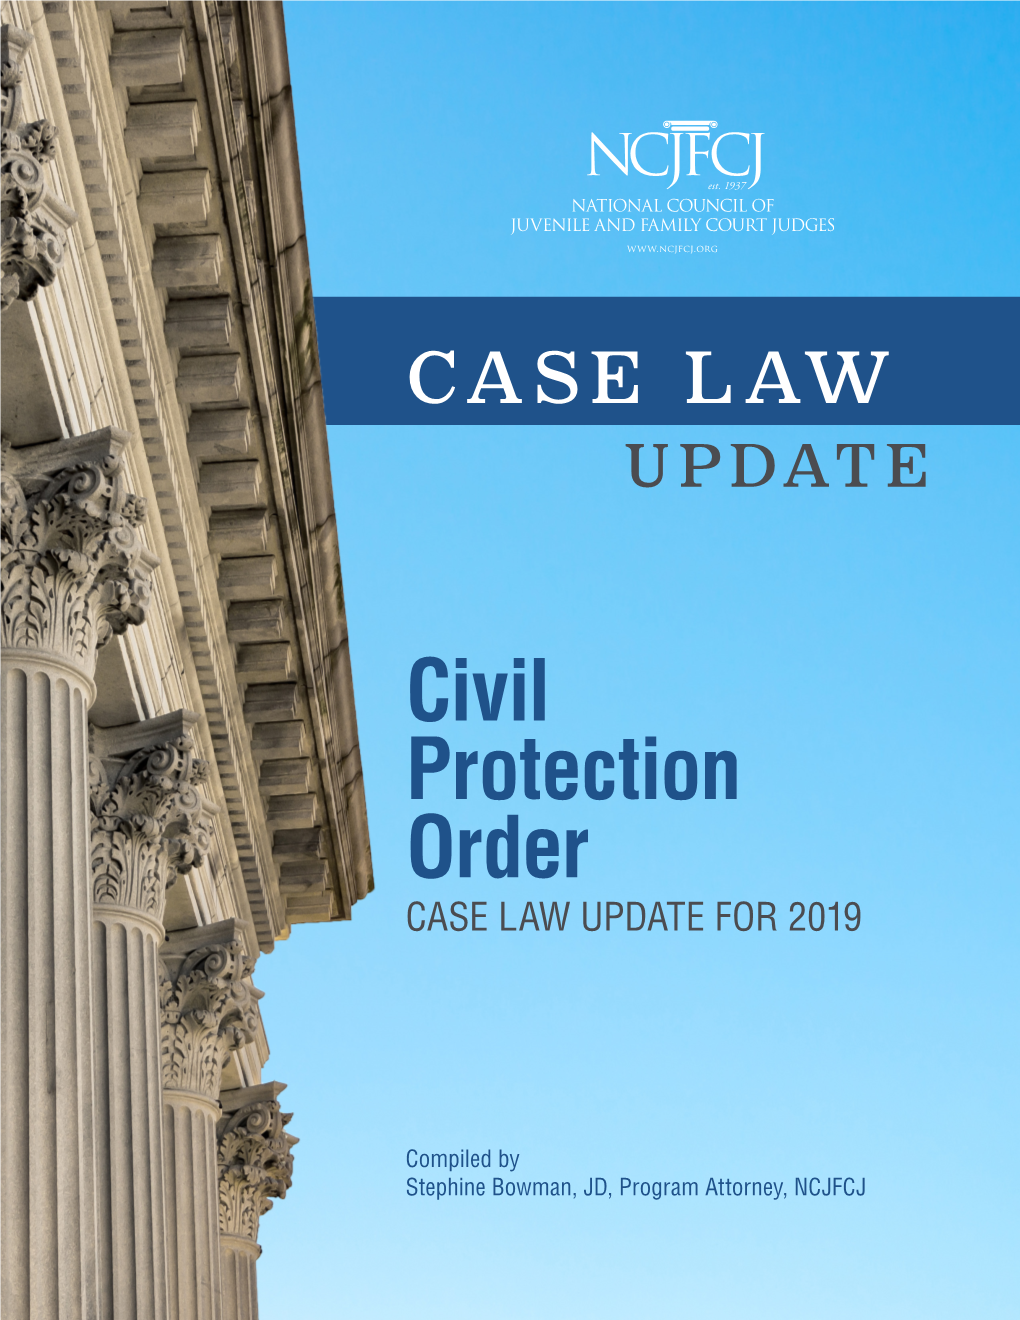 Civil Protection Order: Case Law Update for 2019